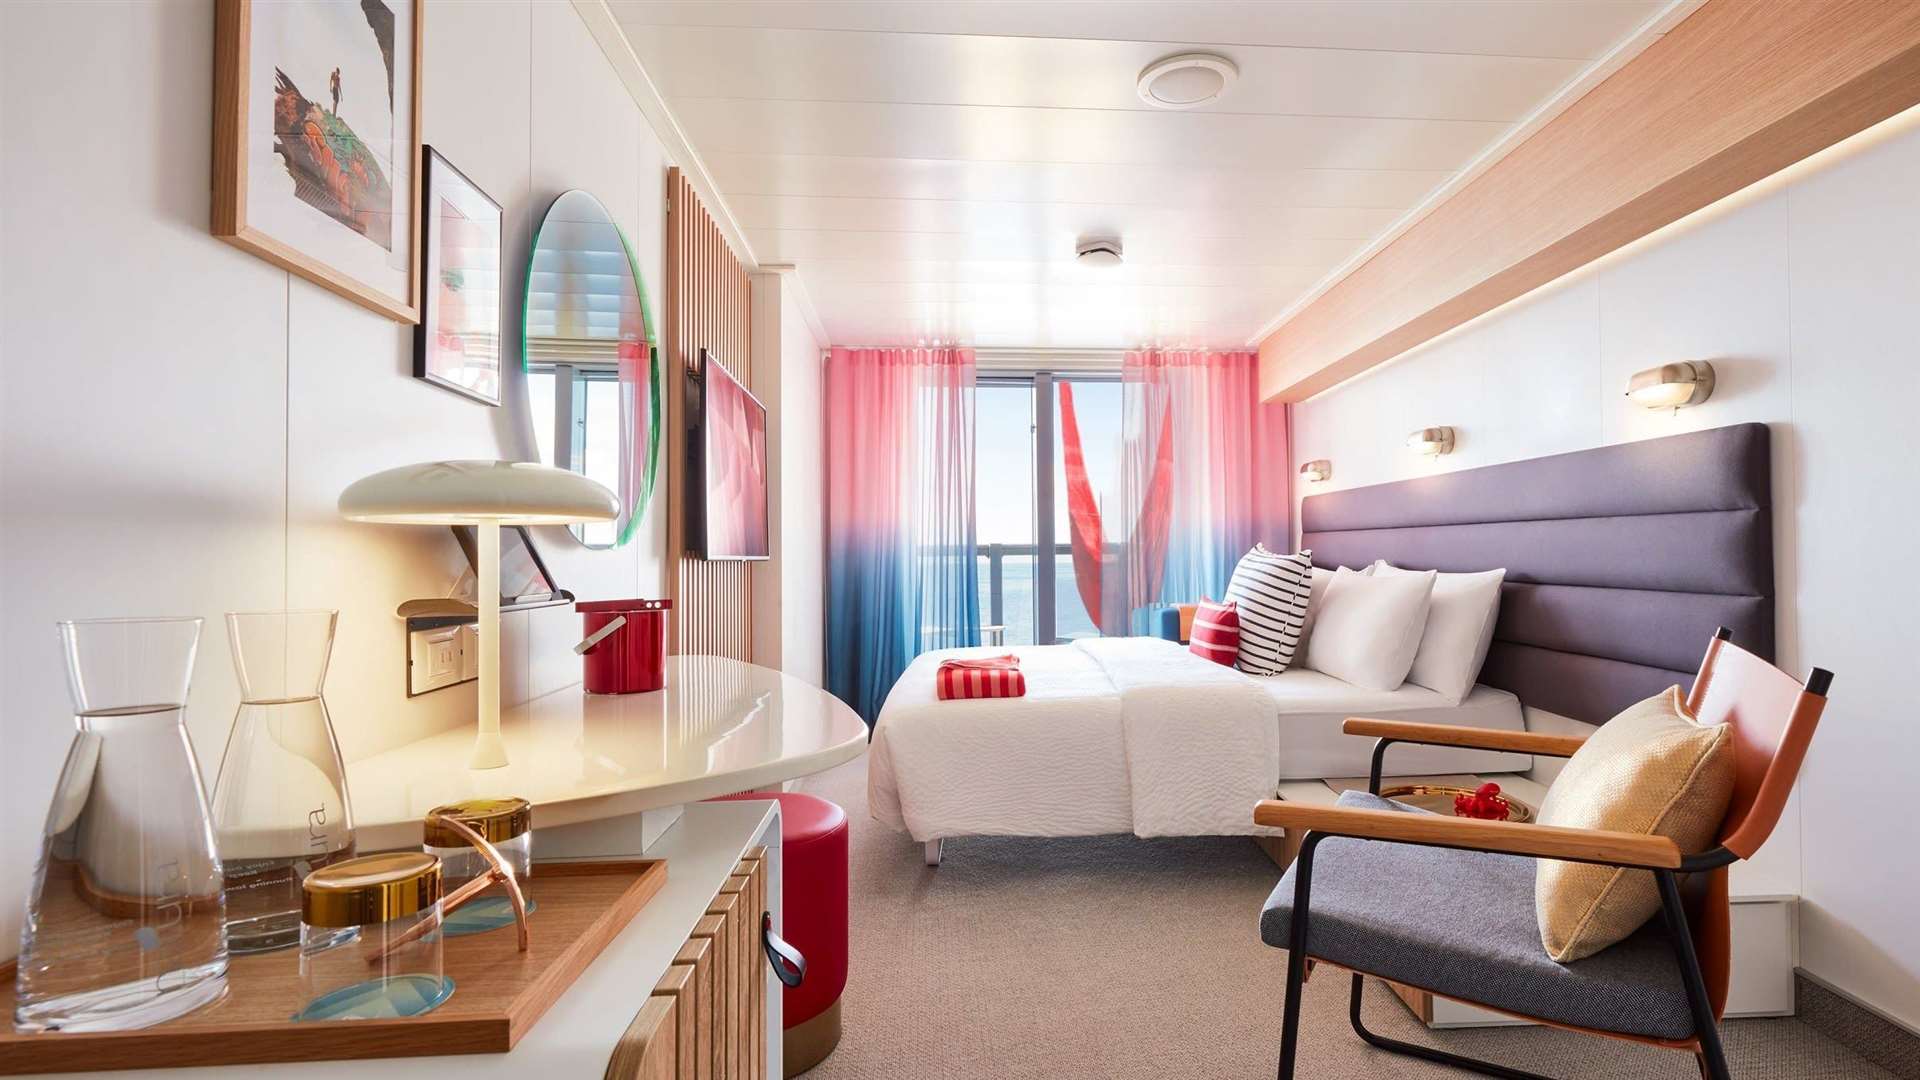 A cabin inside the new Virgin Voyages cruise ship Valiant Lady. Picture: Virgin Voyages